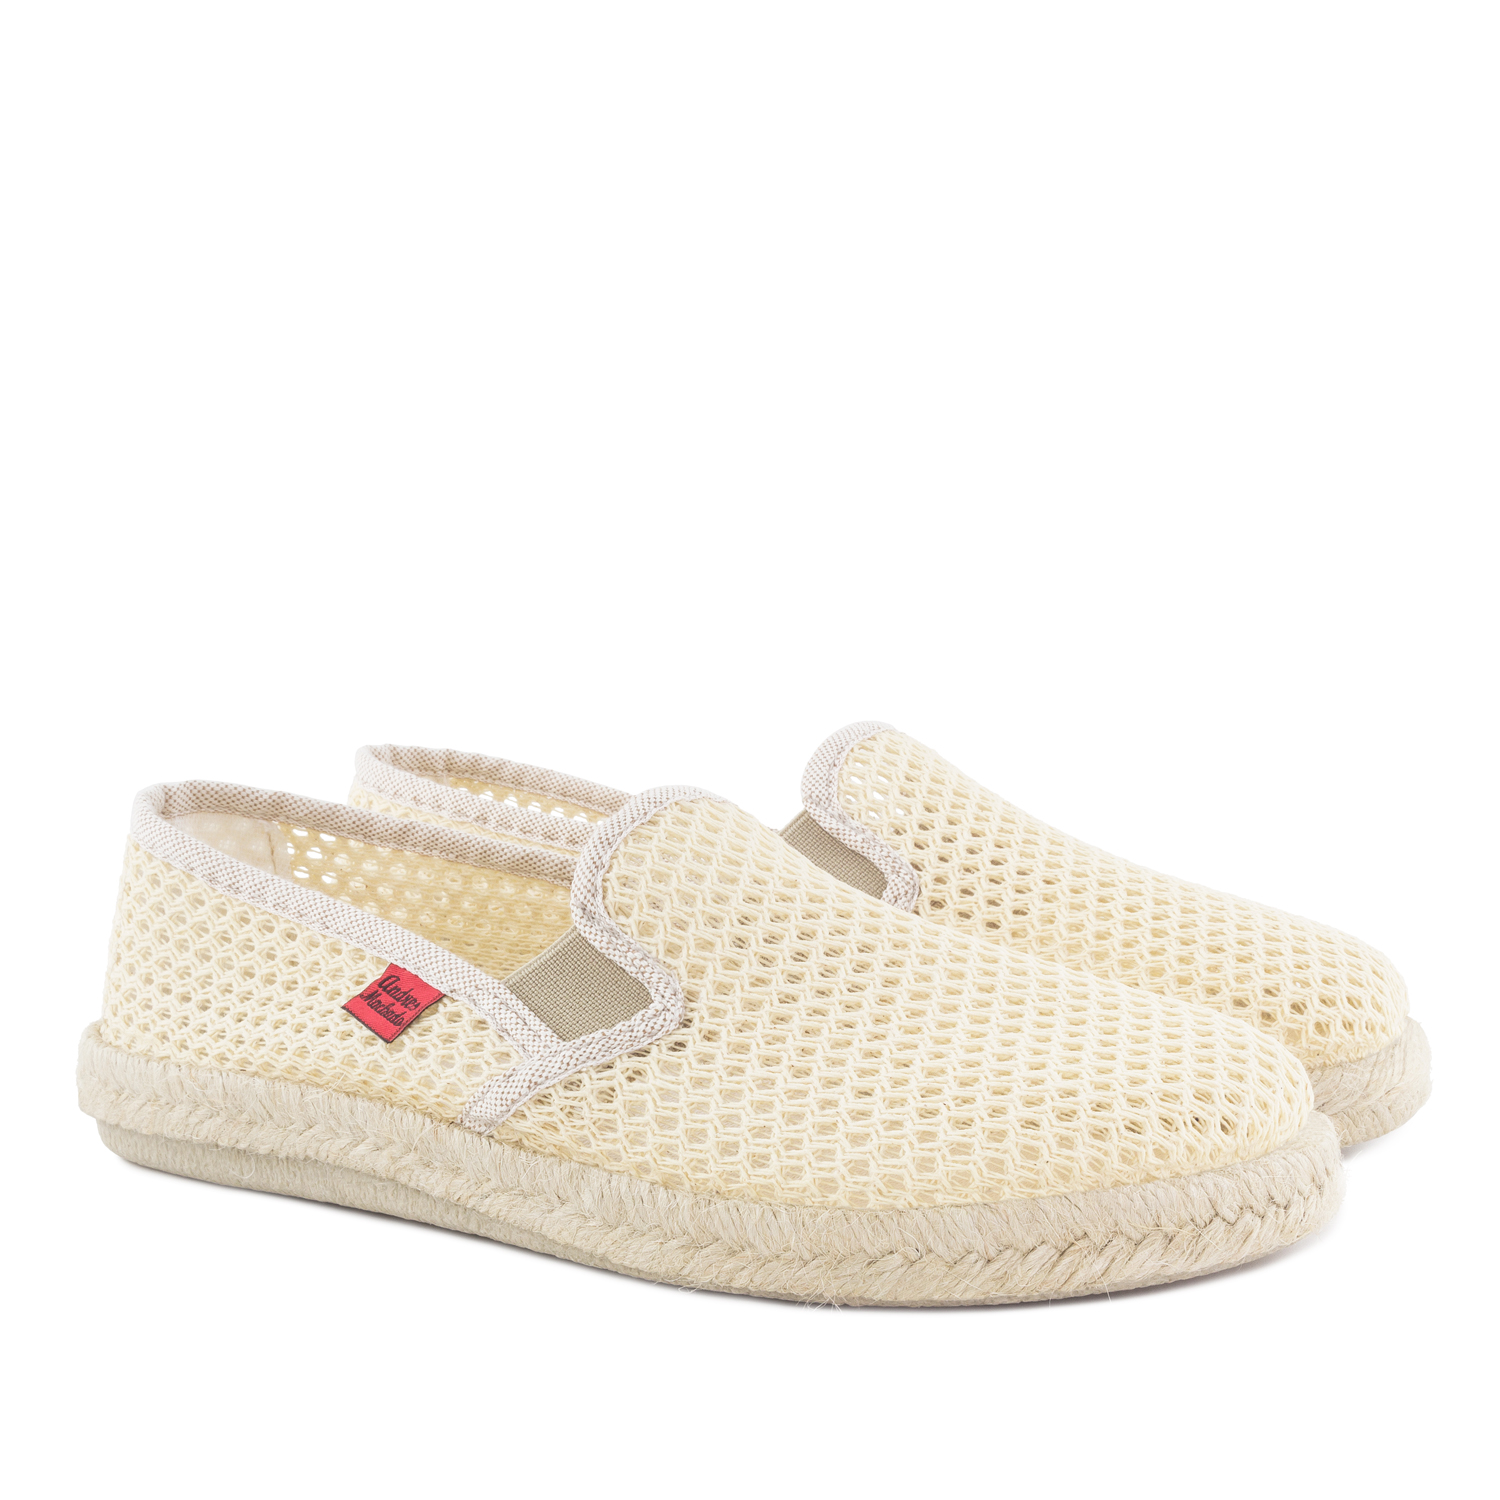 Mythical Beige Mesh Slip-On Shoes with Rubber and Jute Sole 